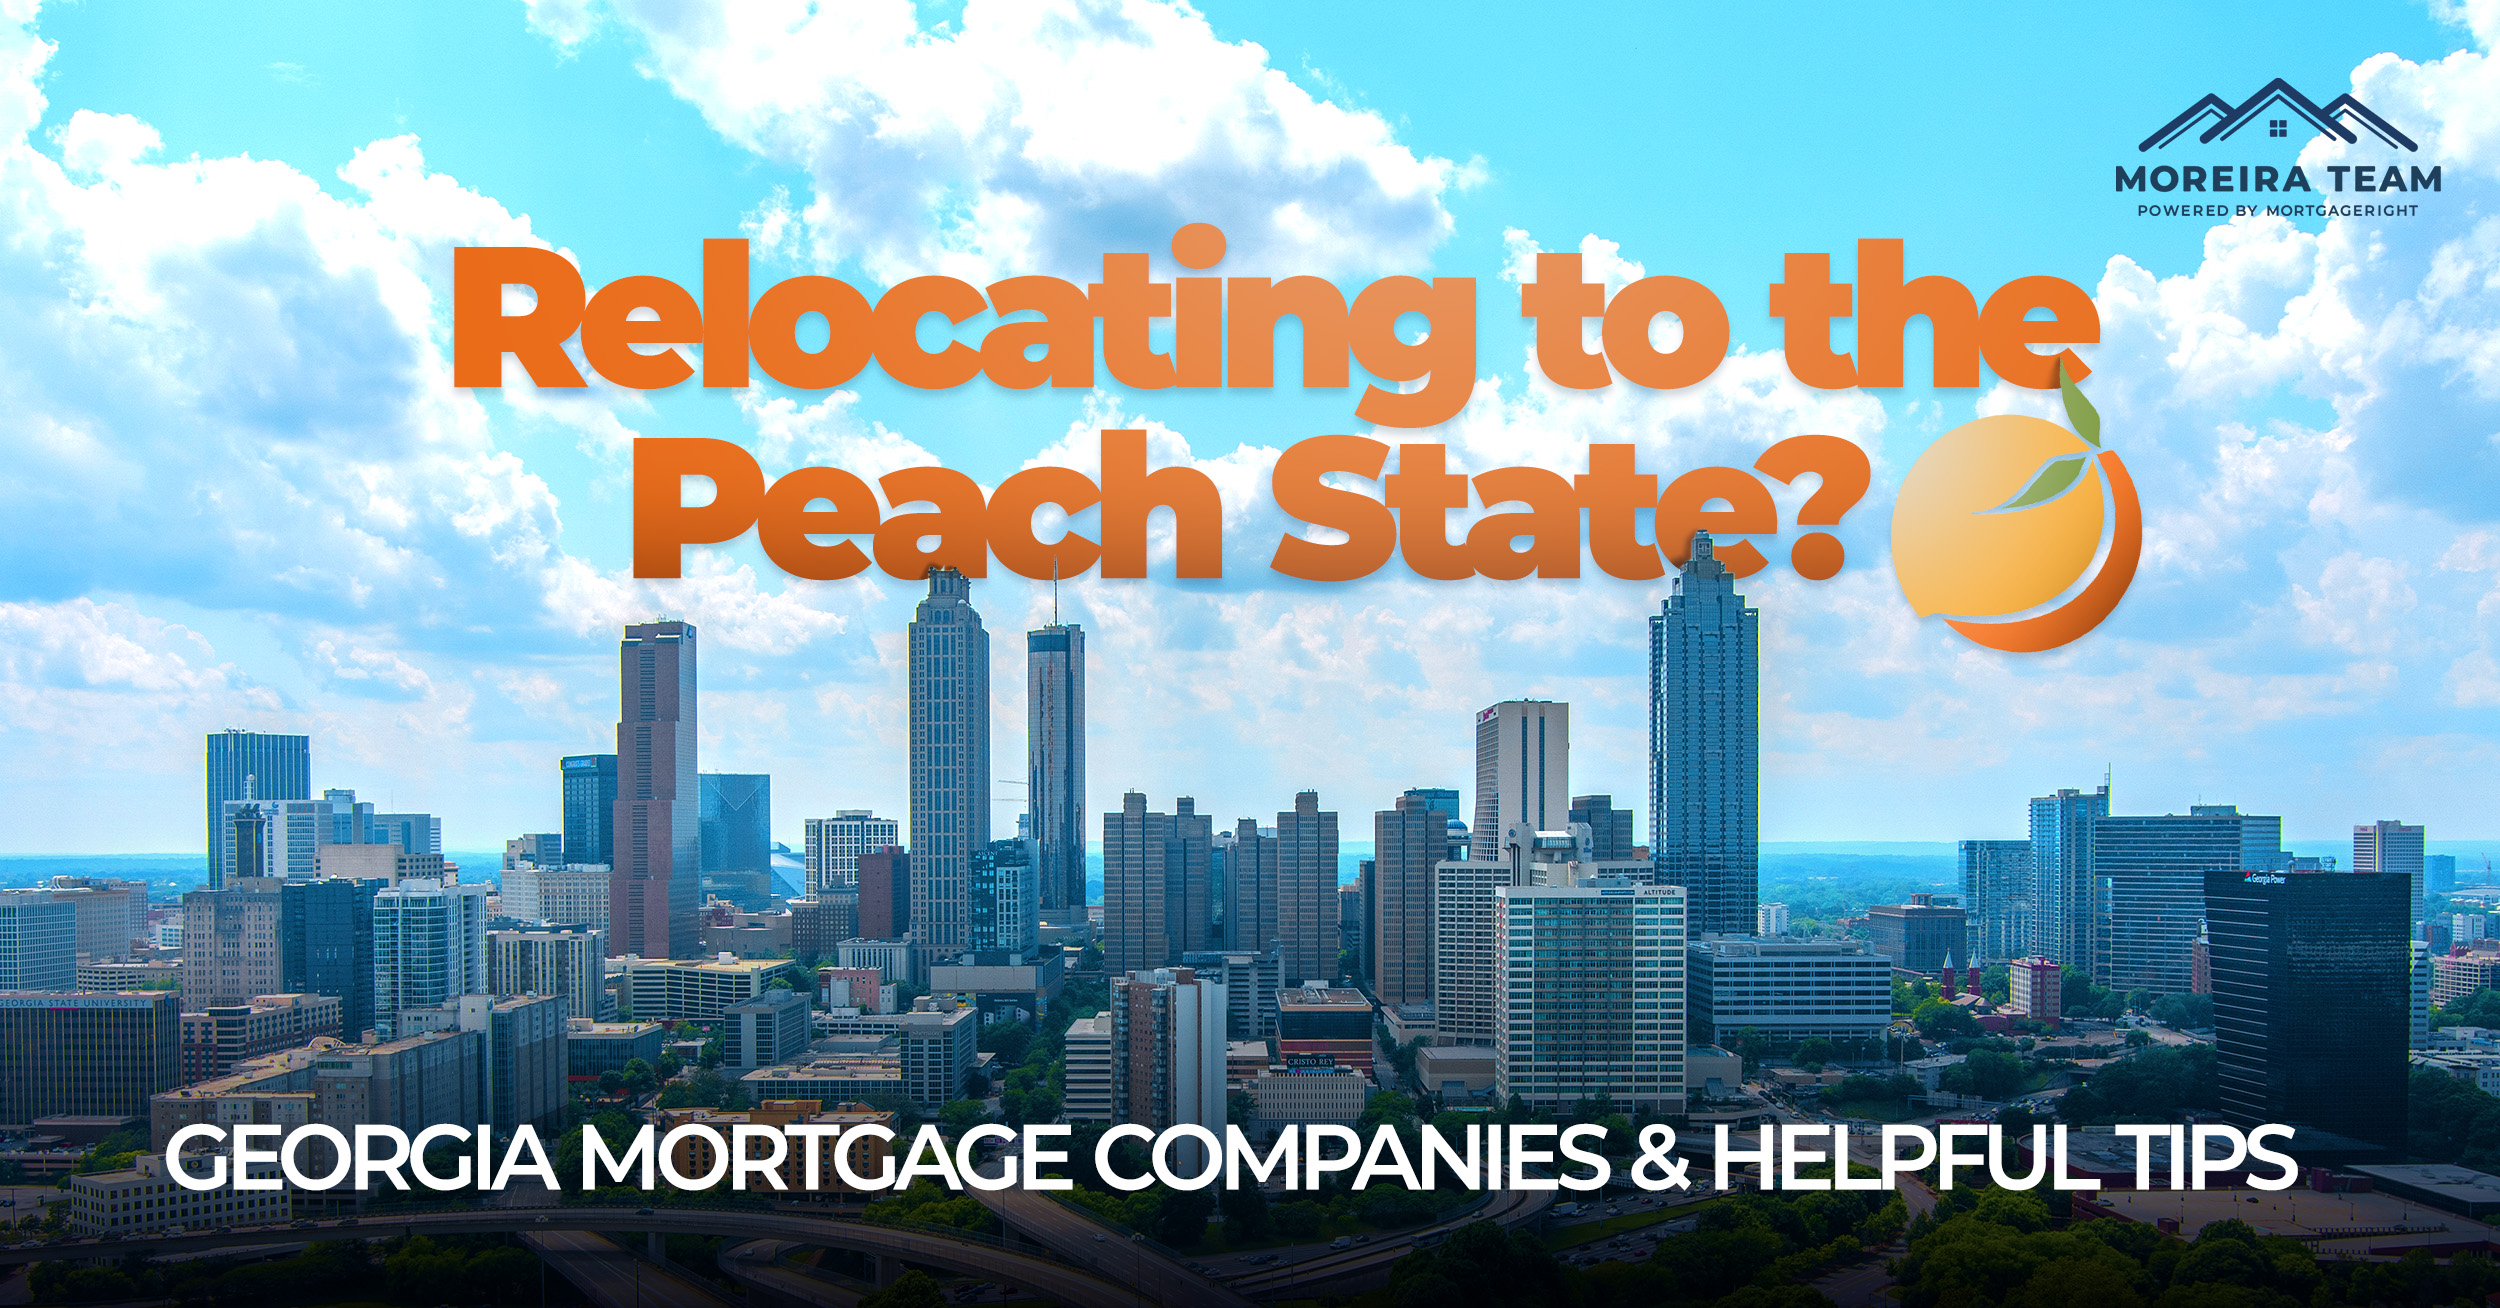 Mortgage Companies in Georgia & Other Helpful Tips for Relocating to the Peach State